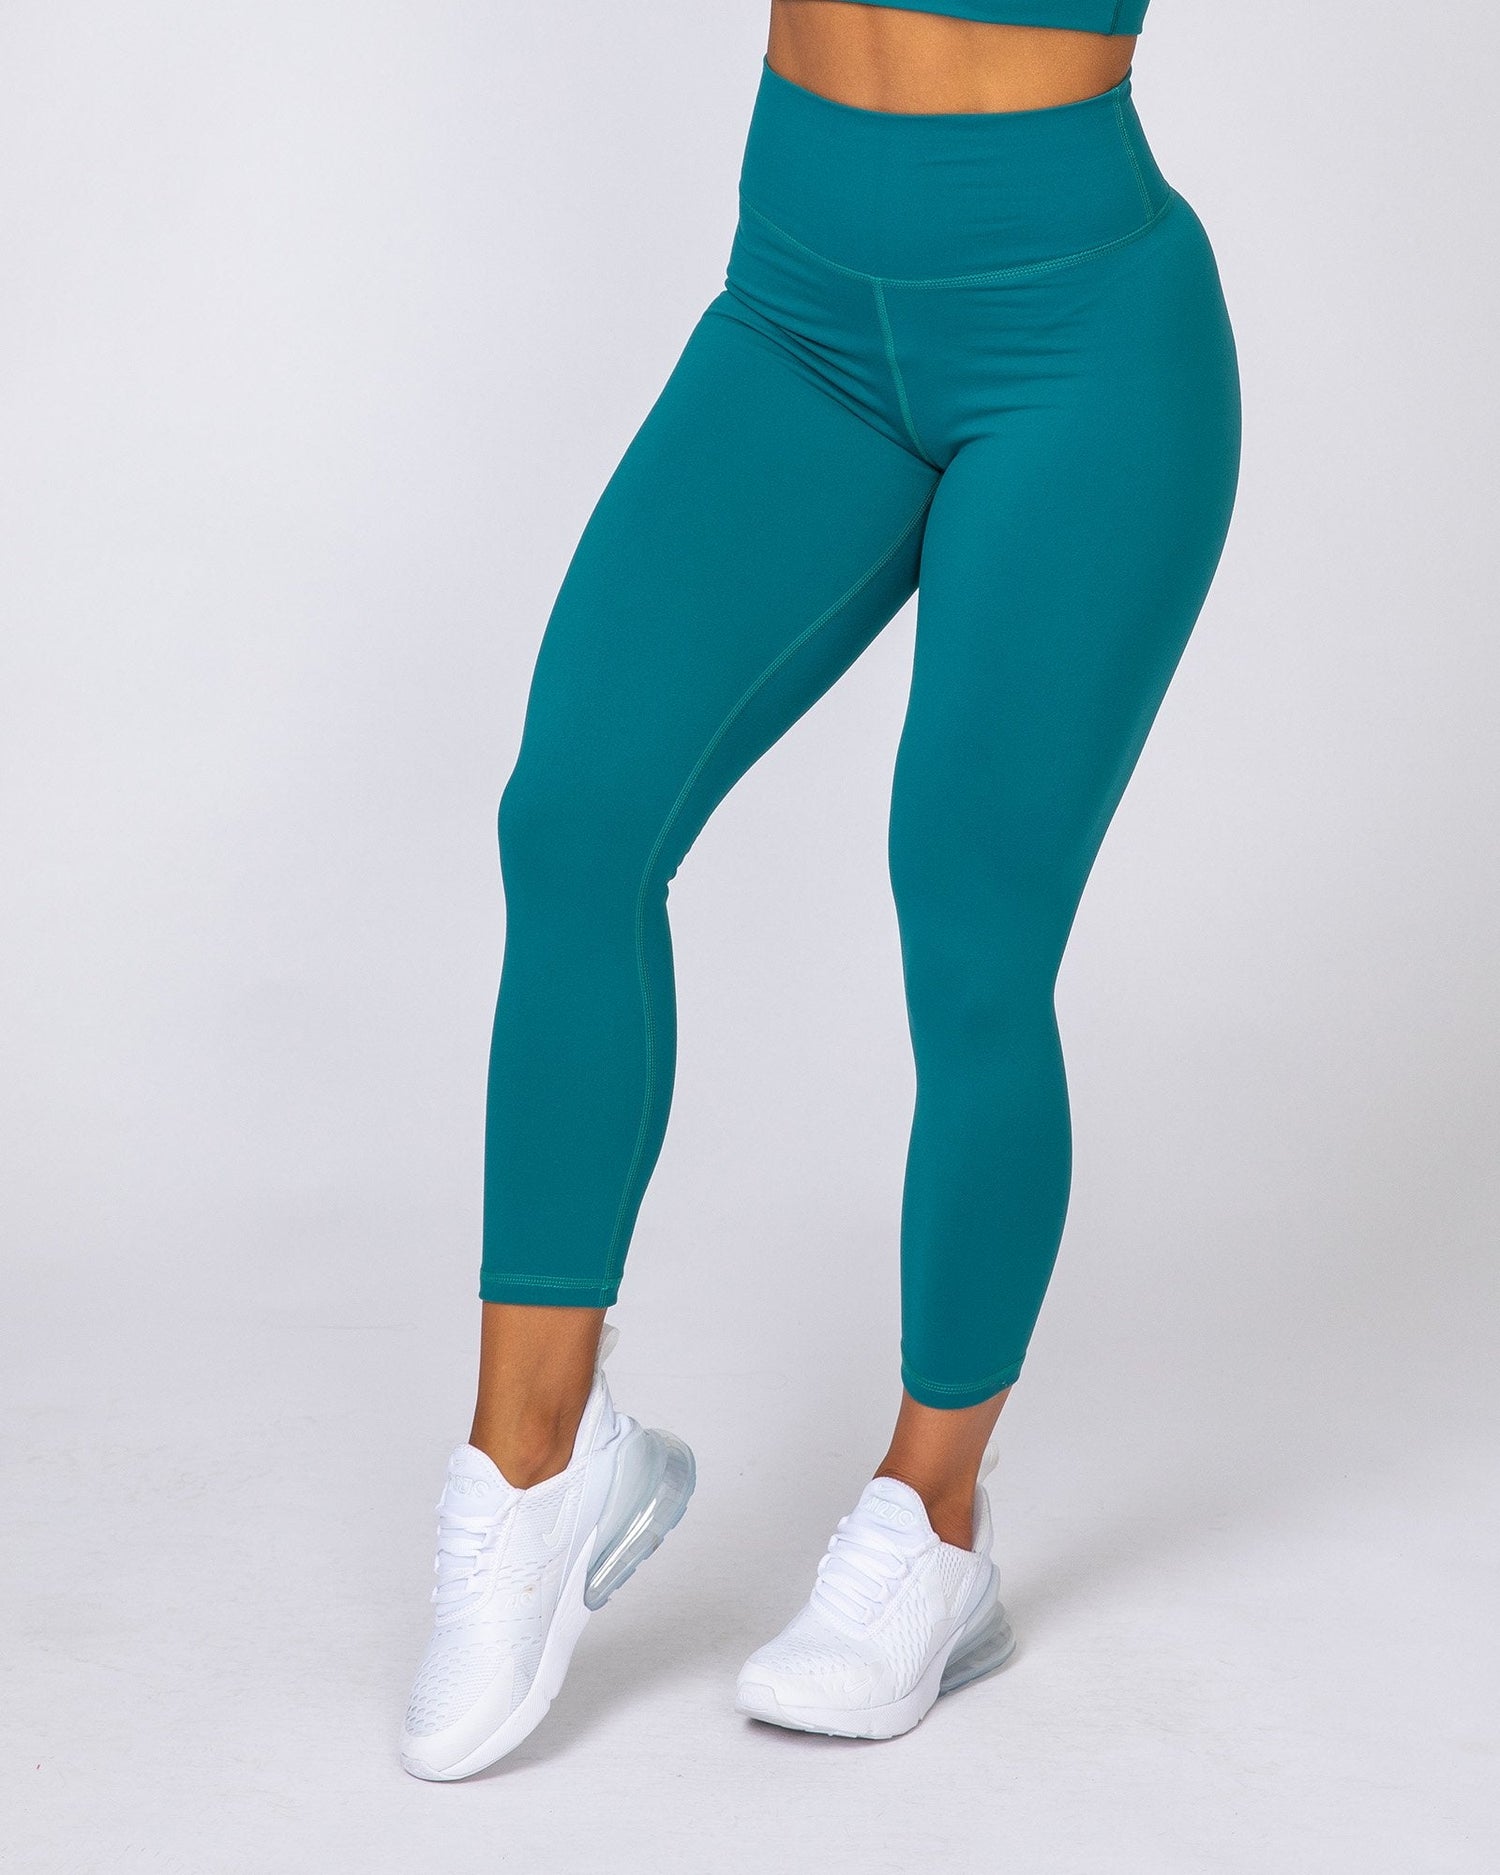 Signature Scrunch 7/8 Leggings - Teal - Muscle Nation